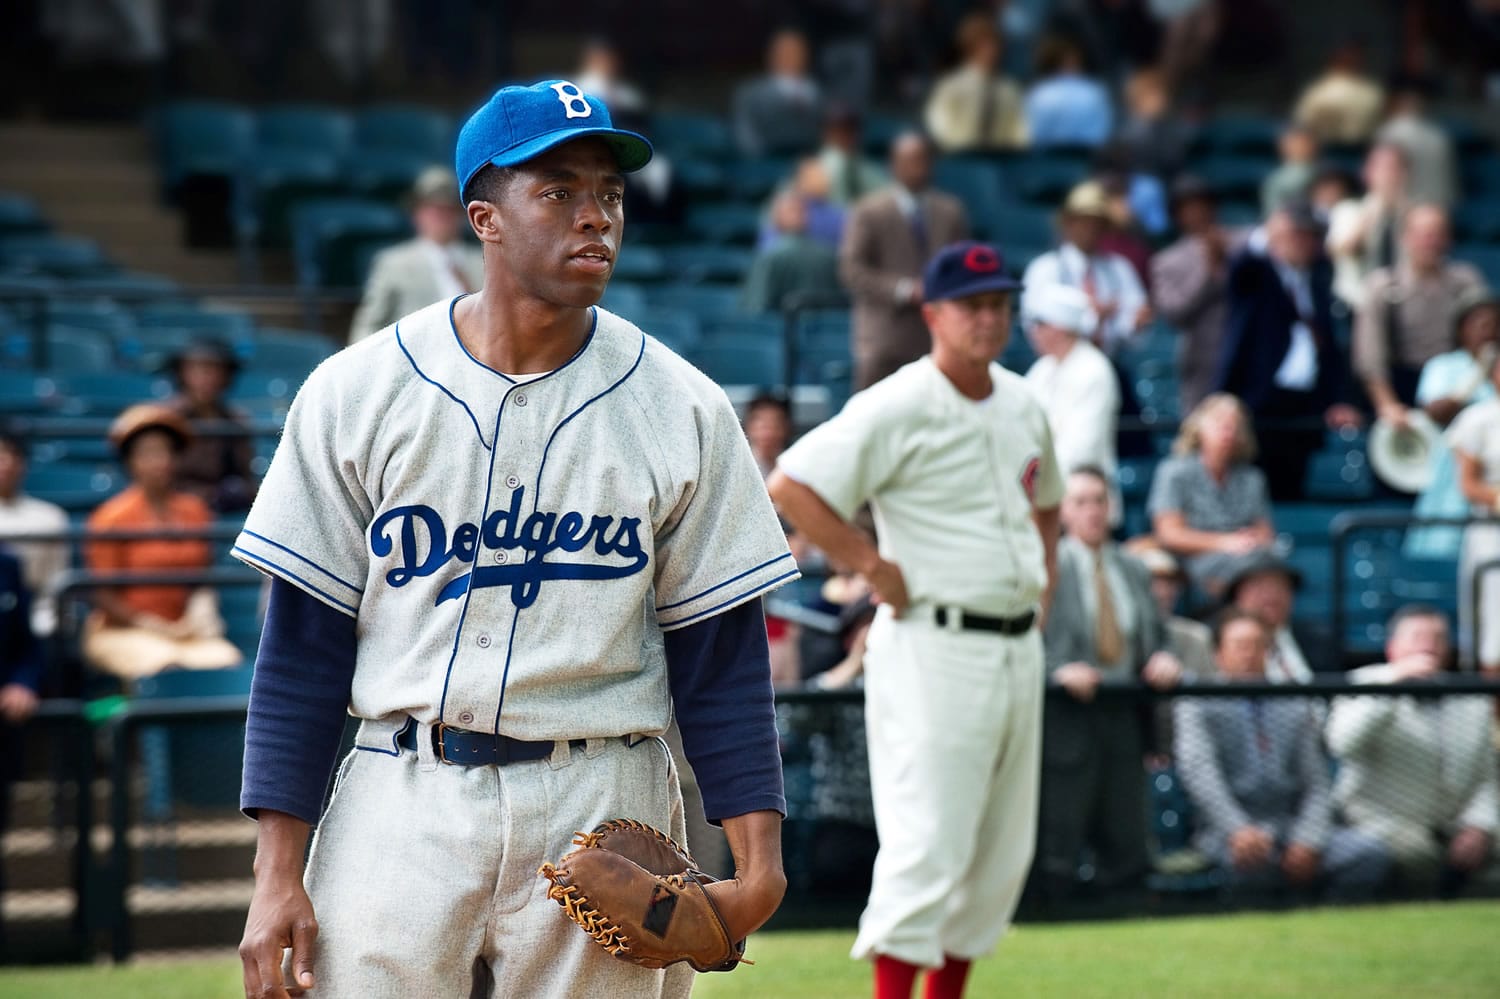 Chadwick Boseman portrays Jackie Robinson in a scene from &quot;42,&quot; by writer-director Brian Helgeland. Remembering Robinson's accomplishments is more important than ever, say people involved with &quot;42&quot; and baseball historians alike.